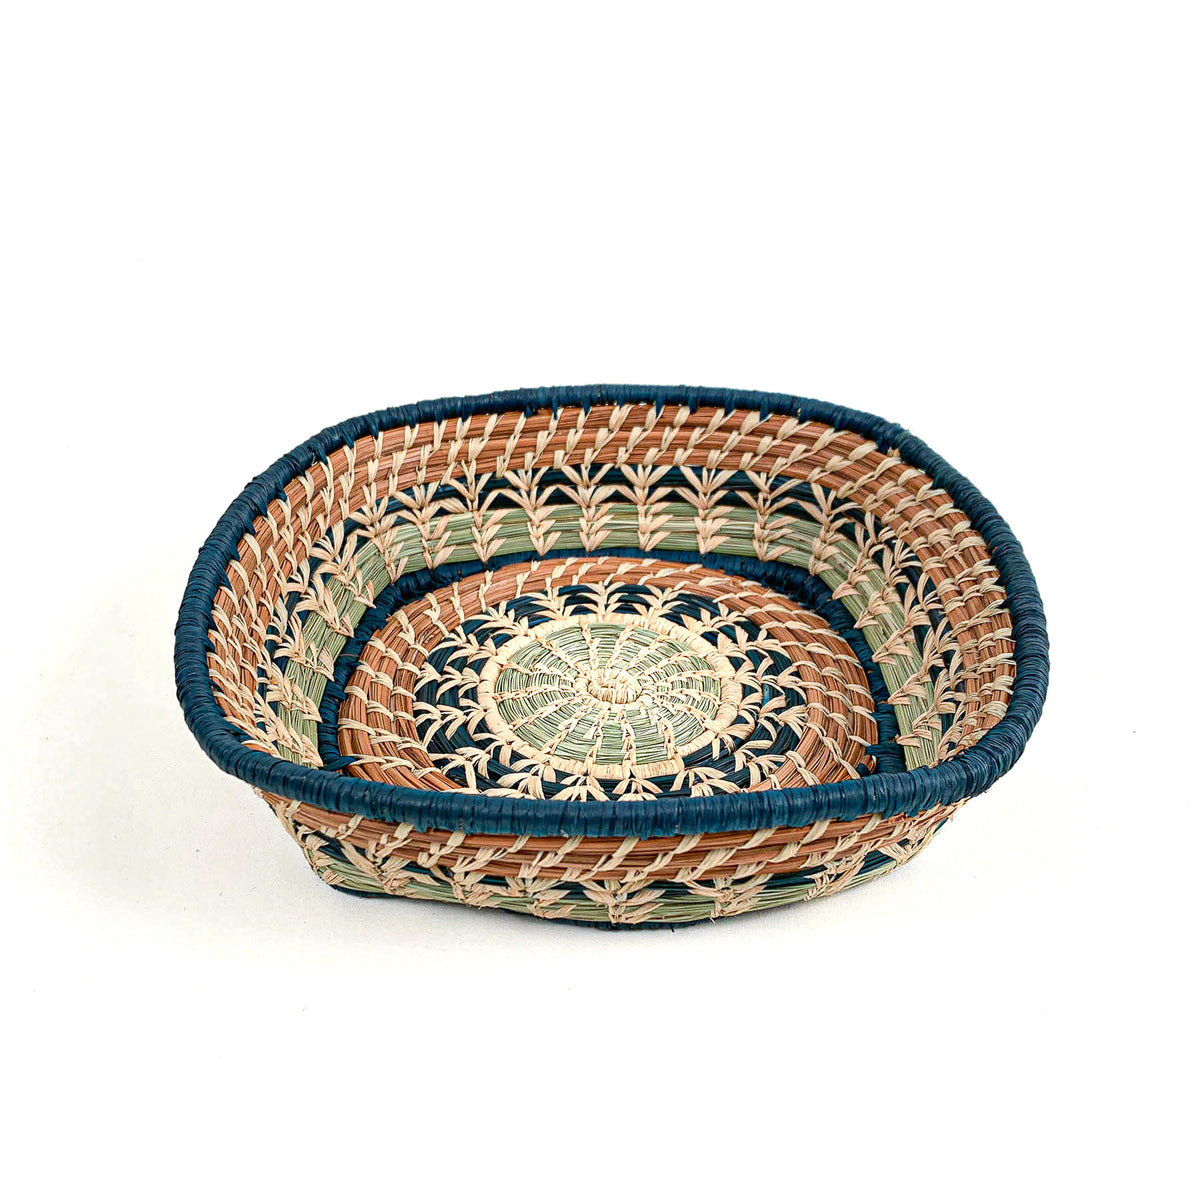 Square basket with circular center in blues and browns alt view